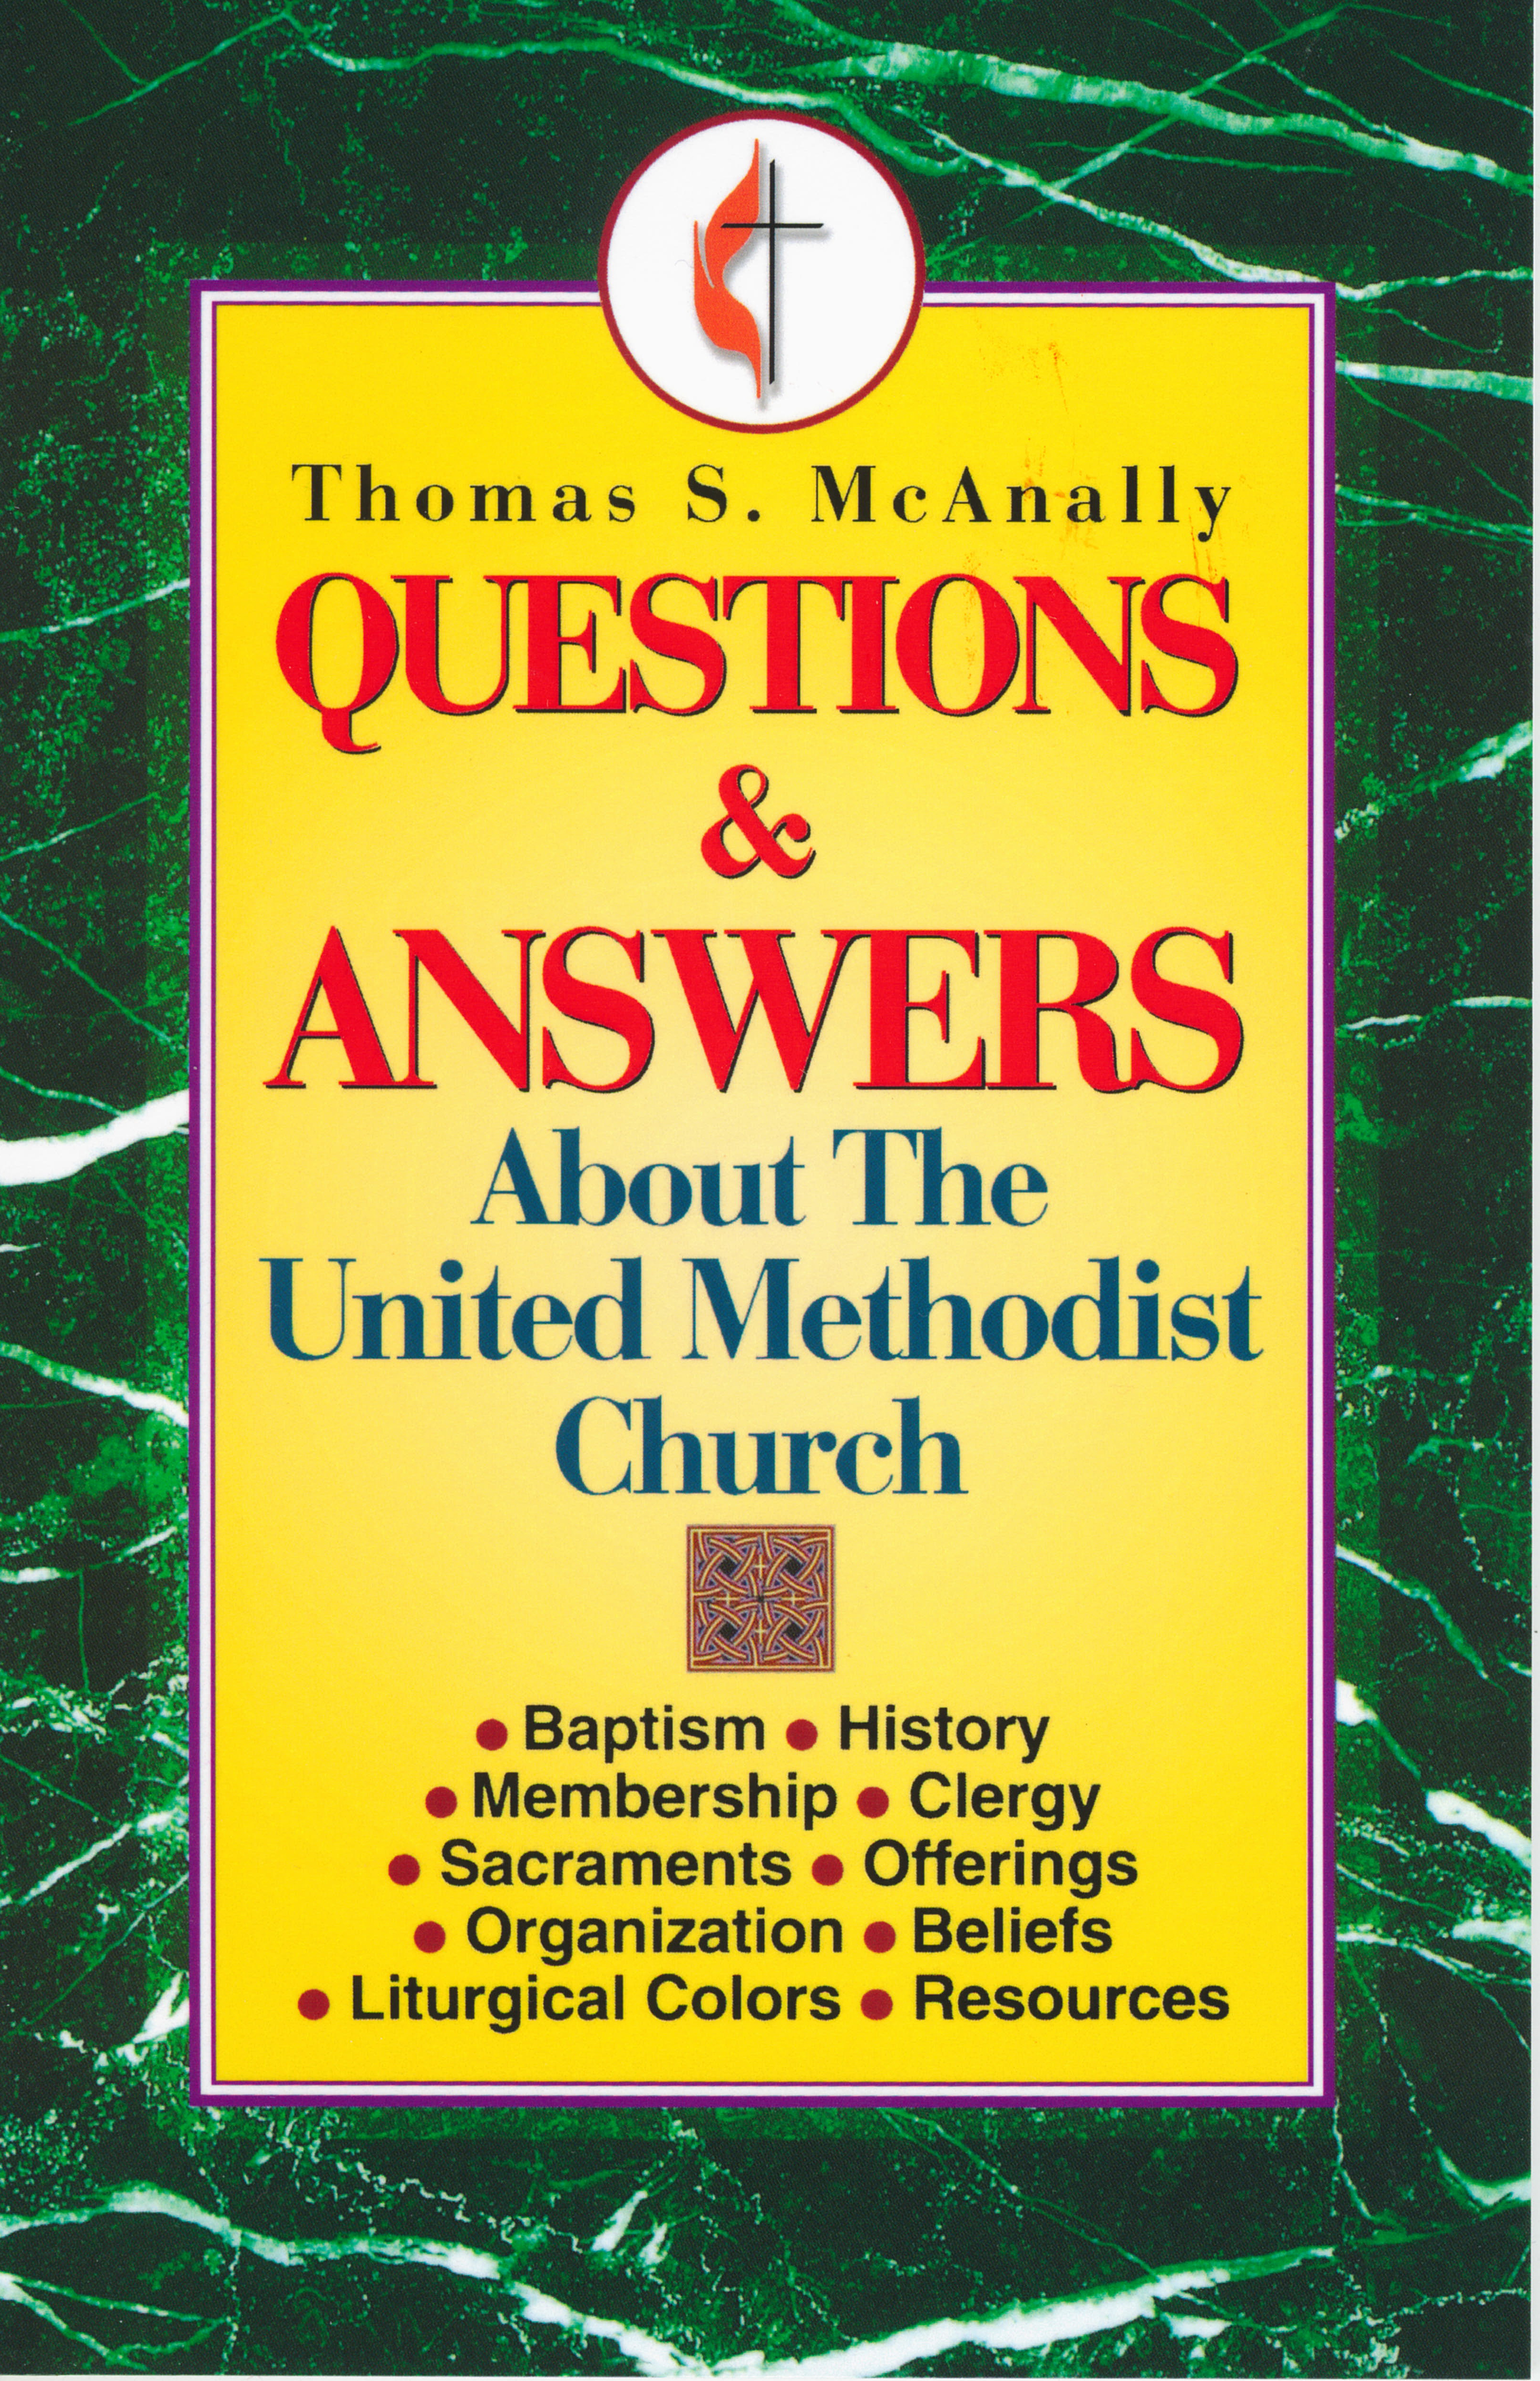 Questions & Answers About The United Methodist Church by Thomas S. McAnally 108-9780687016709